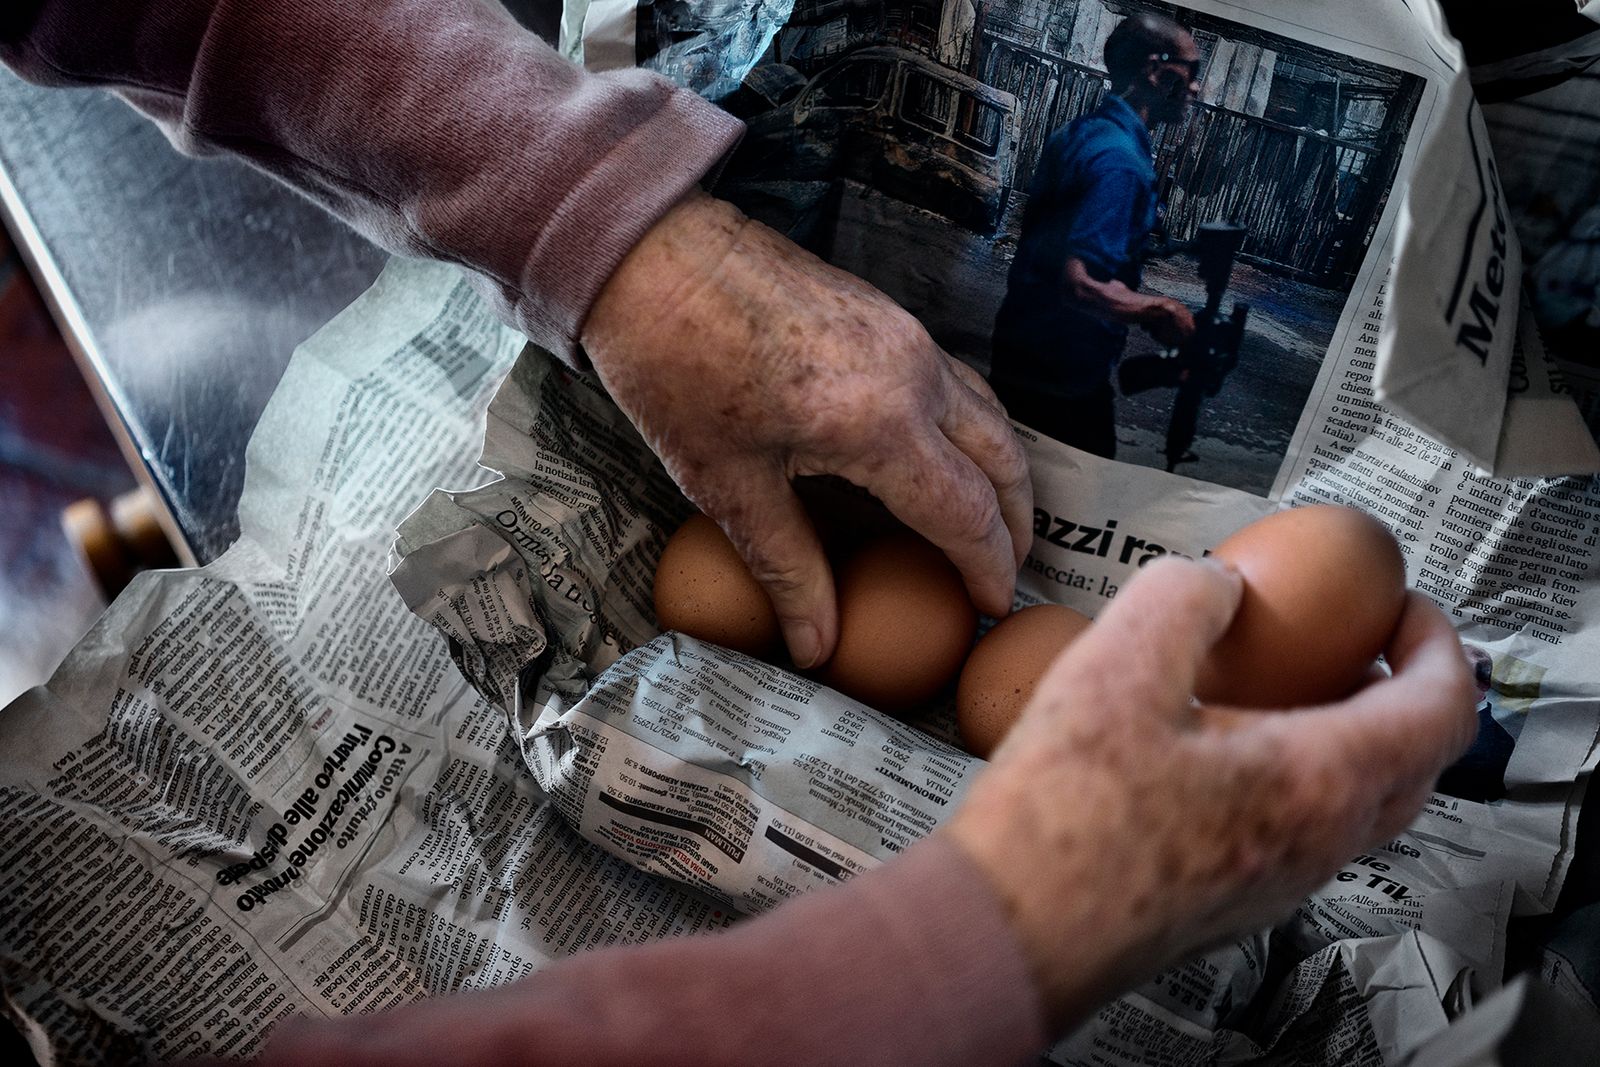 © Simona Bonanno - Every Tuesday Aunt Sara receives fresh eggs from the countryside; they are rolled in a newspaper sheet.